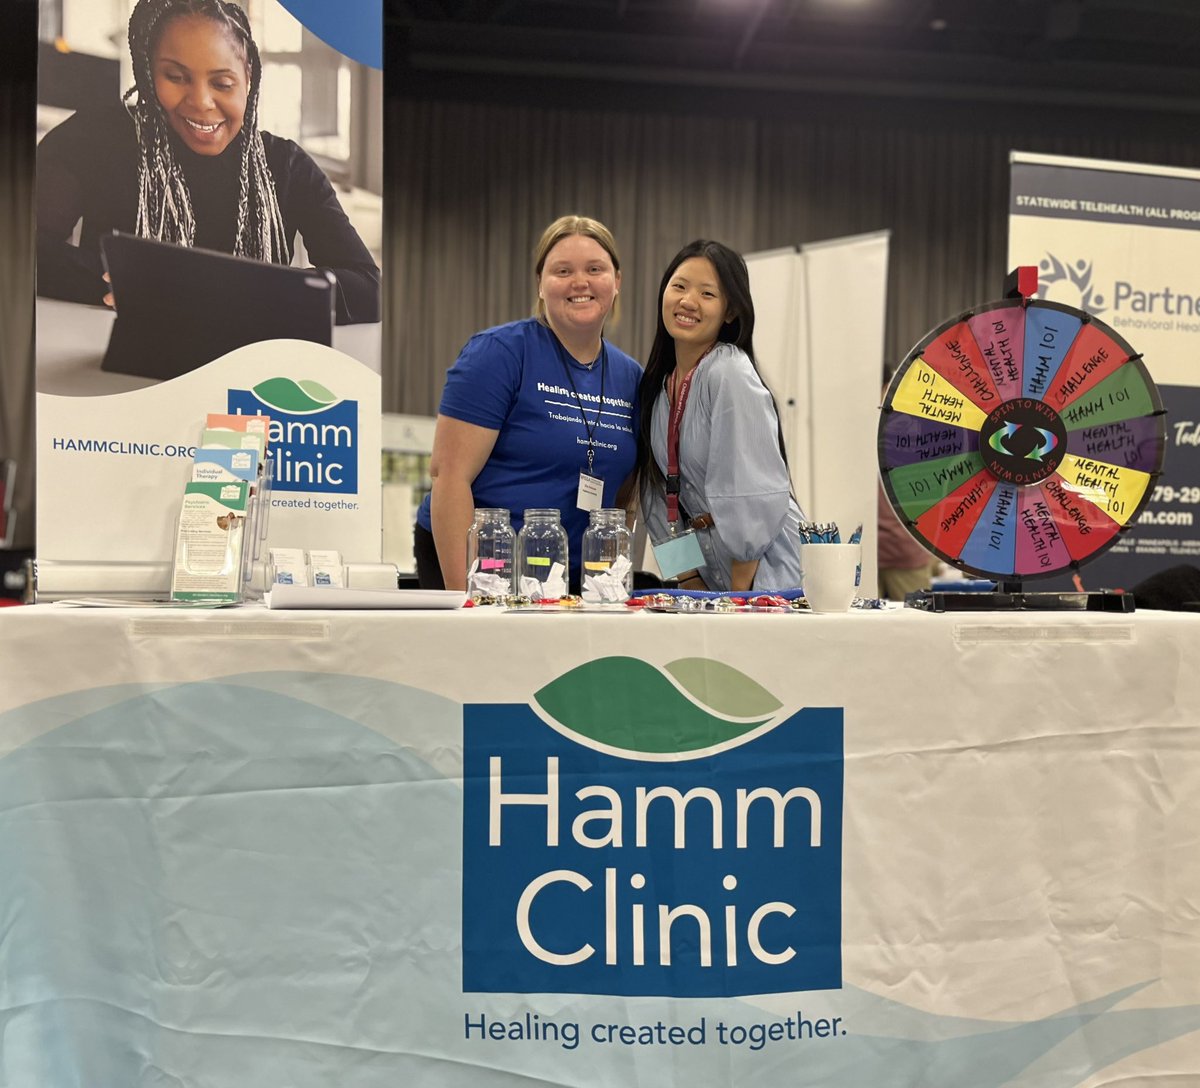 Our Development Associate Tsai and MSW Macro Practice Intern Ellie are welcoming visitors at our MSSA Conference Booth - ask them about #mentalhealth #telementalhealth and spin the trivia wheel